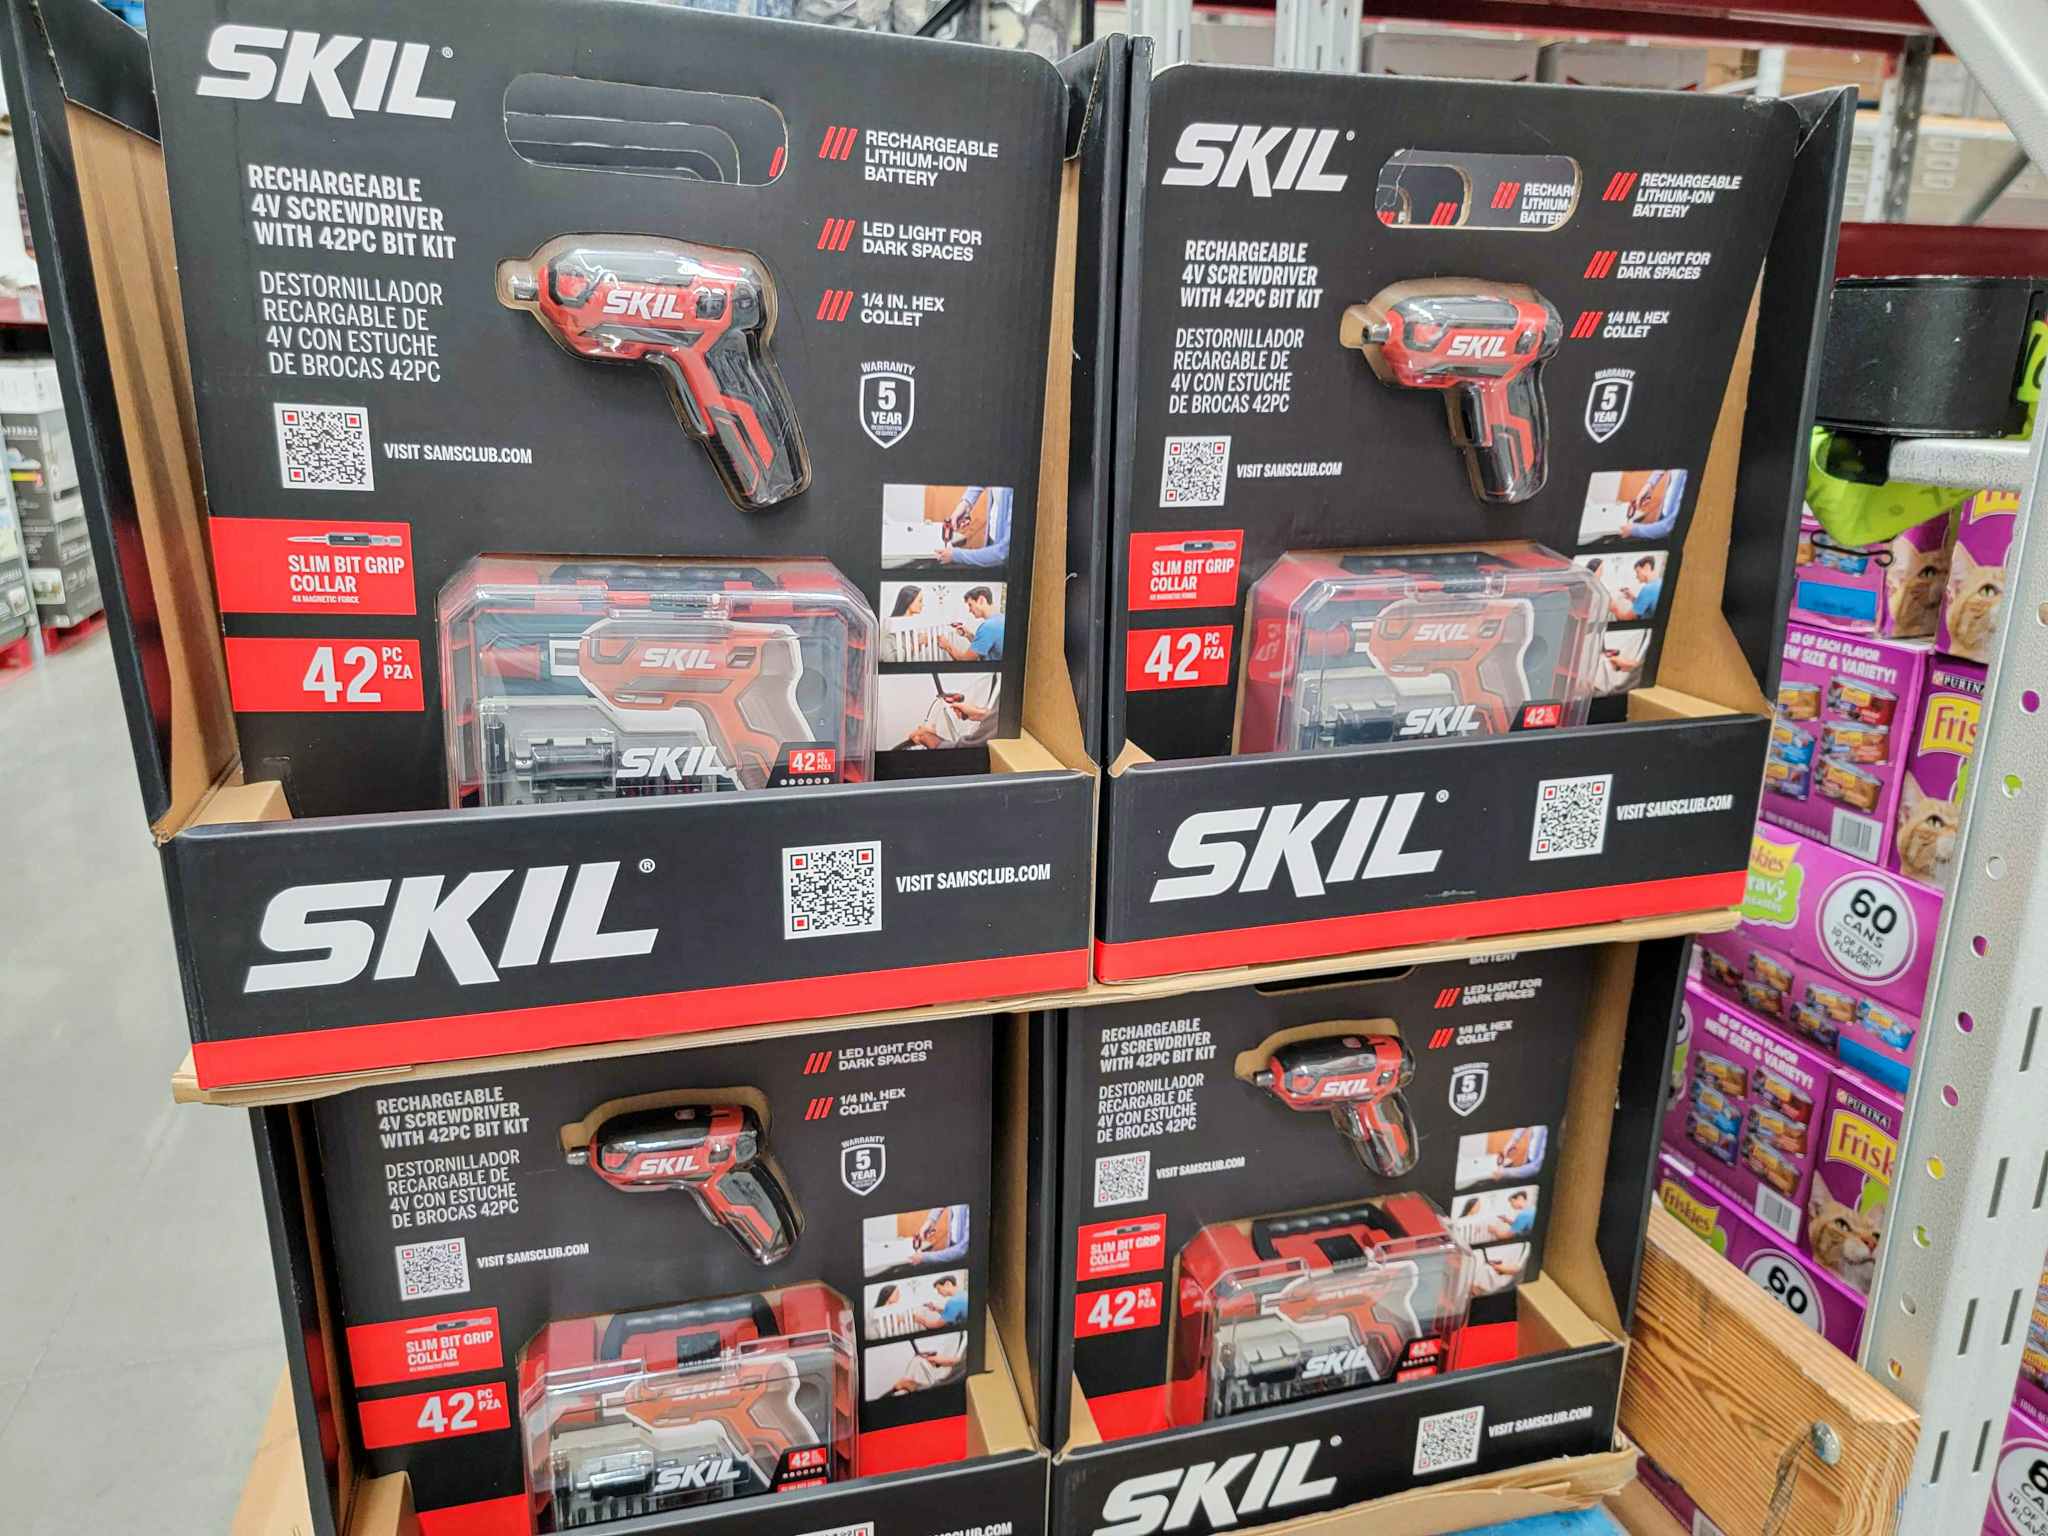 skil rechargeable screwdriver kits